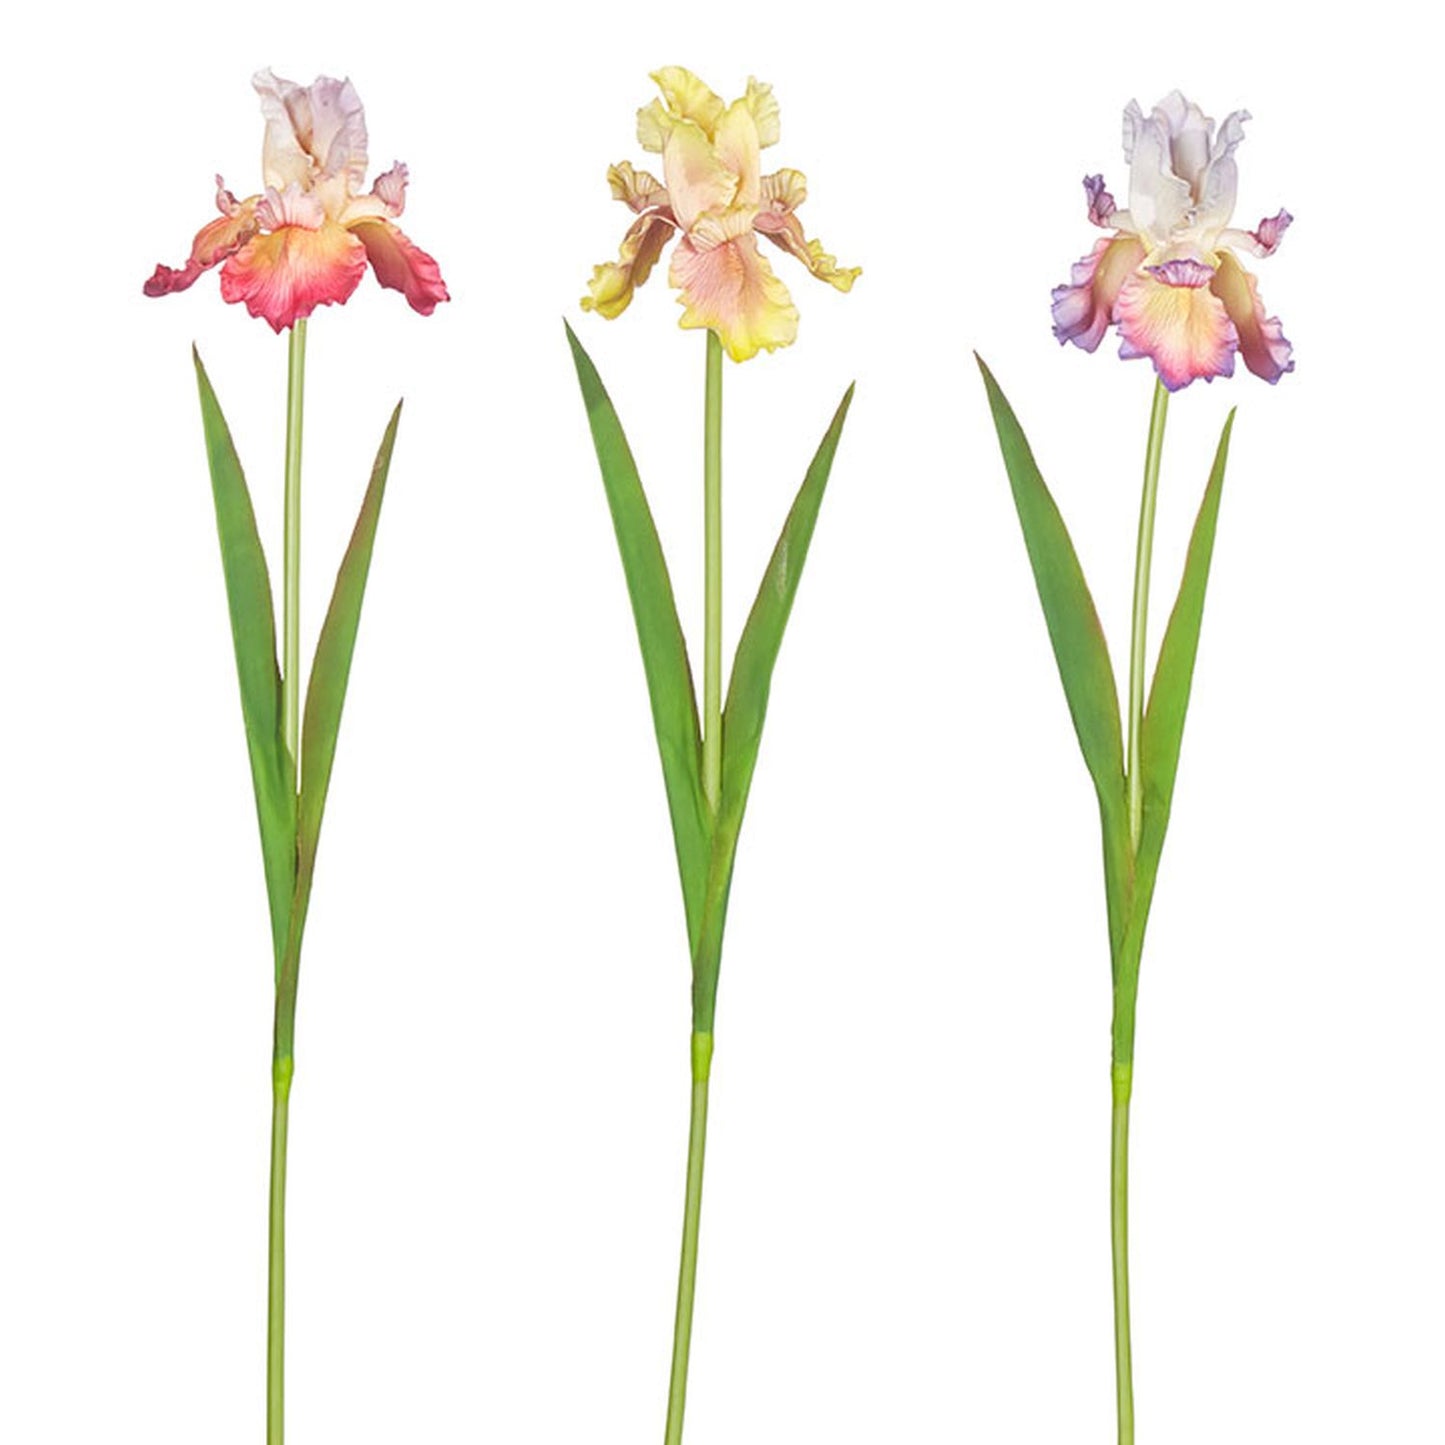 Raz Imports 32.5-inch Real Touch Iris Stem, Assortment of 3 Faux Flowers